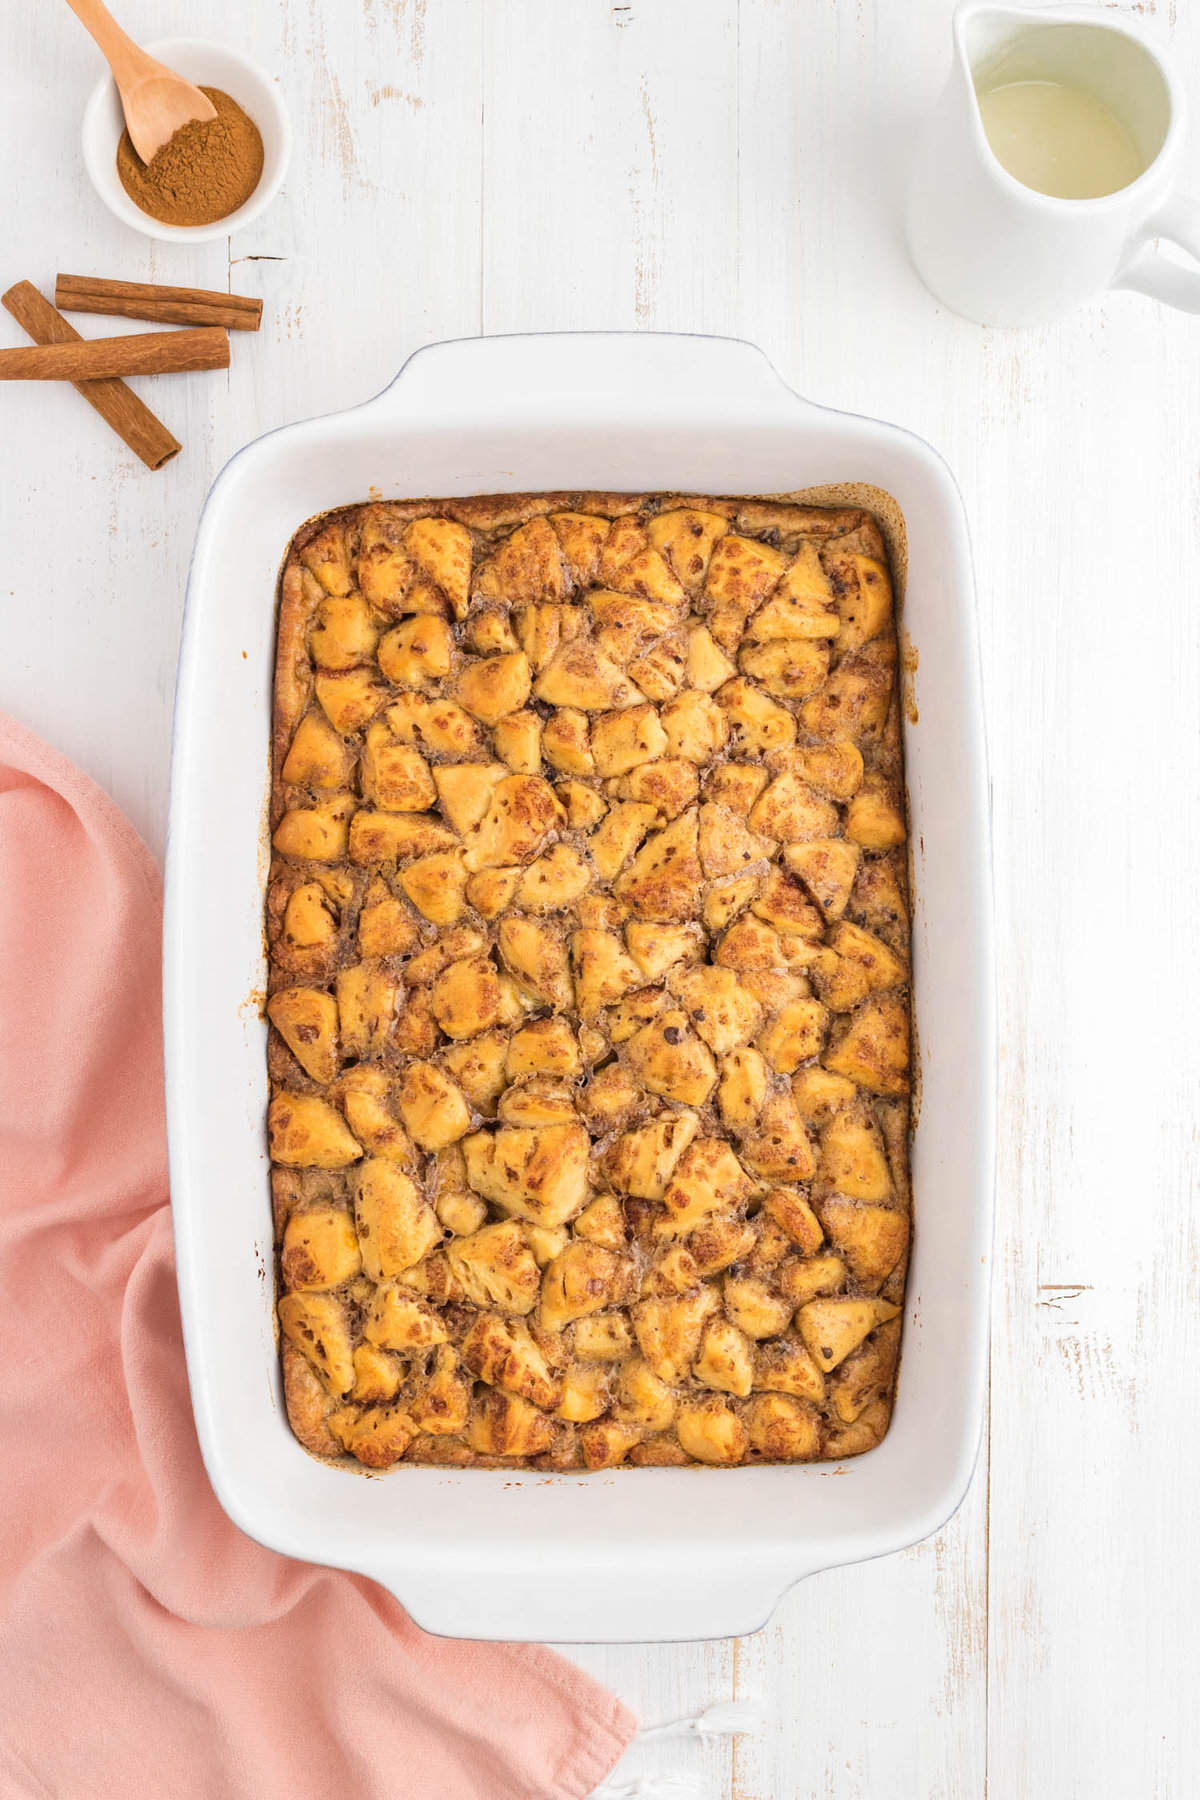 Cinnamon Roll Casserole baked to a golden brown in 9x13 baking dish